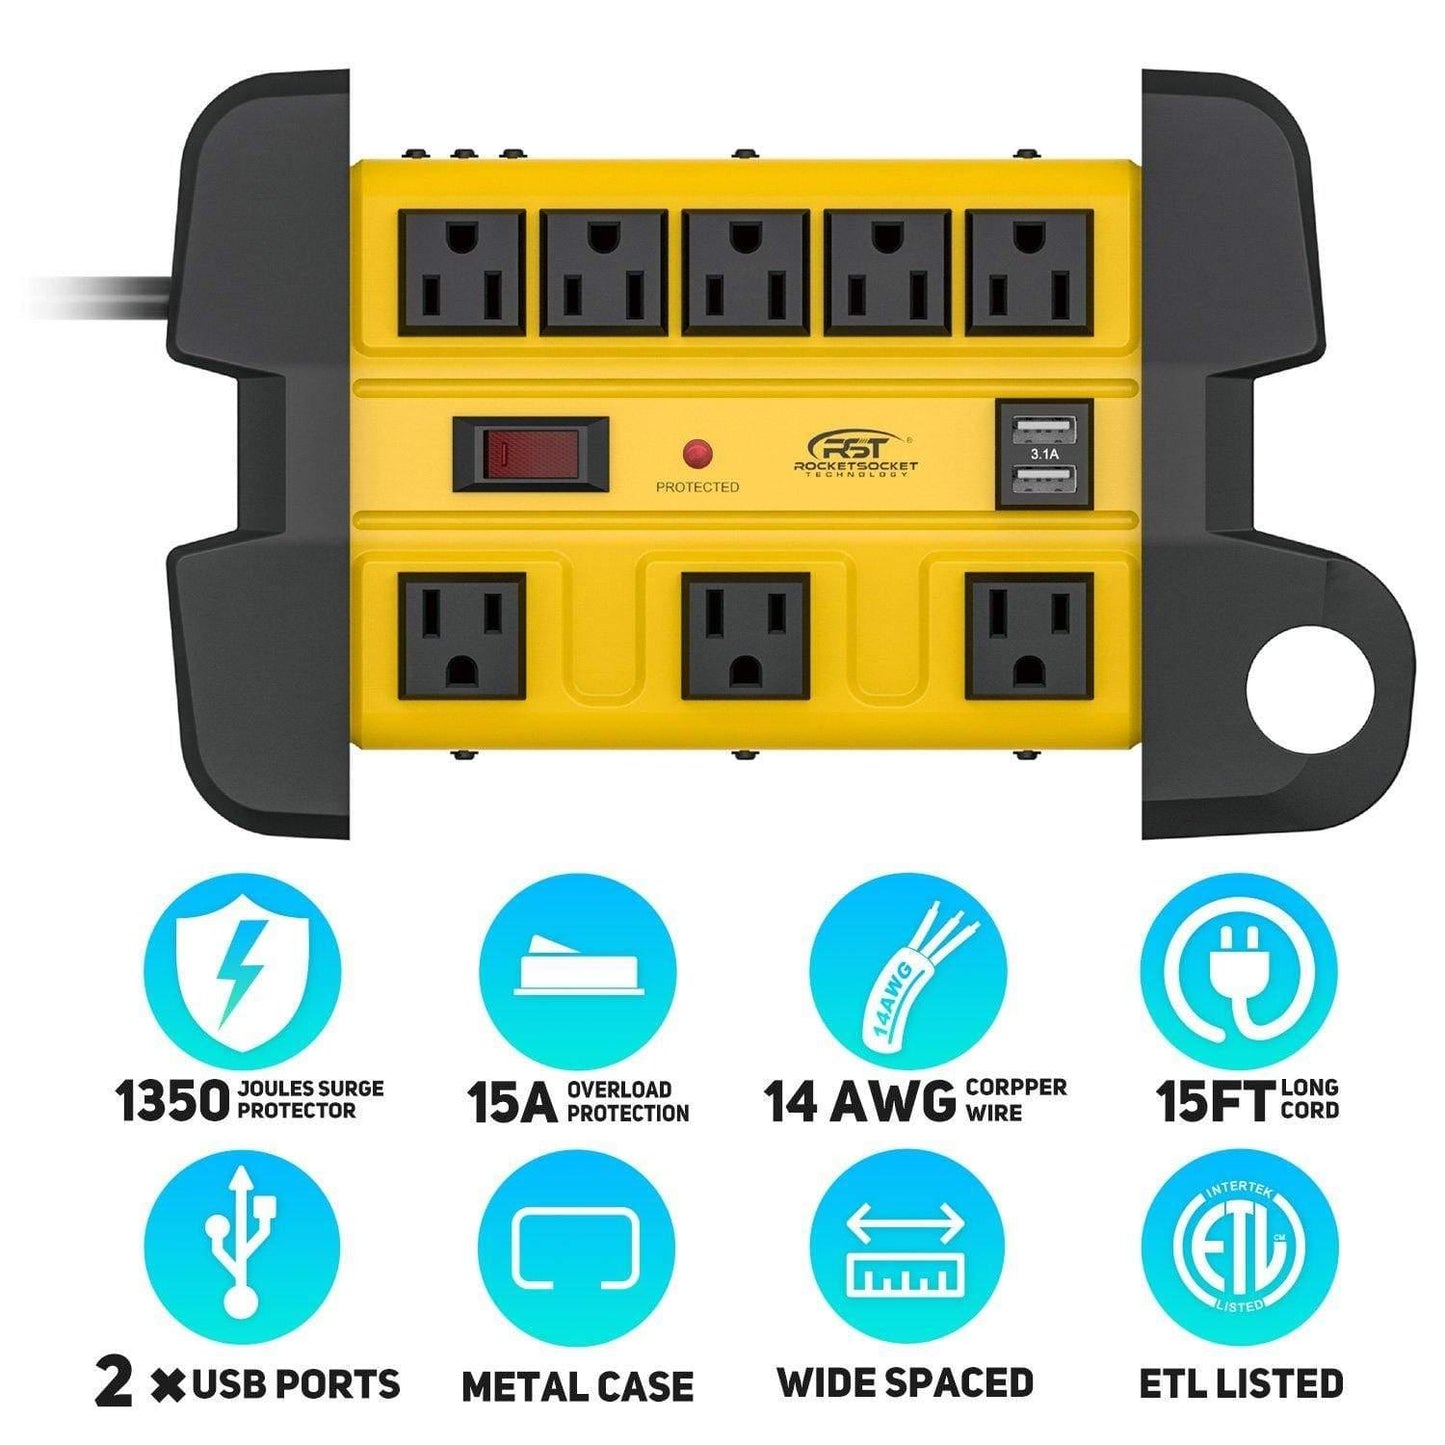 ROCKETSOCKETTECH power strip CRST 8-Outlets with USB(3.1A) 15 ft. Heavy Duty Power Strip Surge Protector 15A